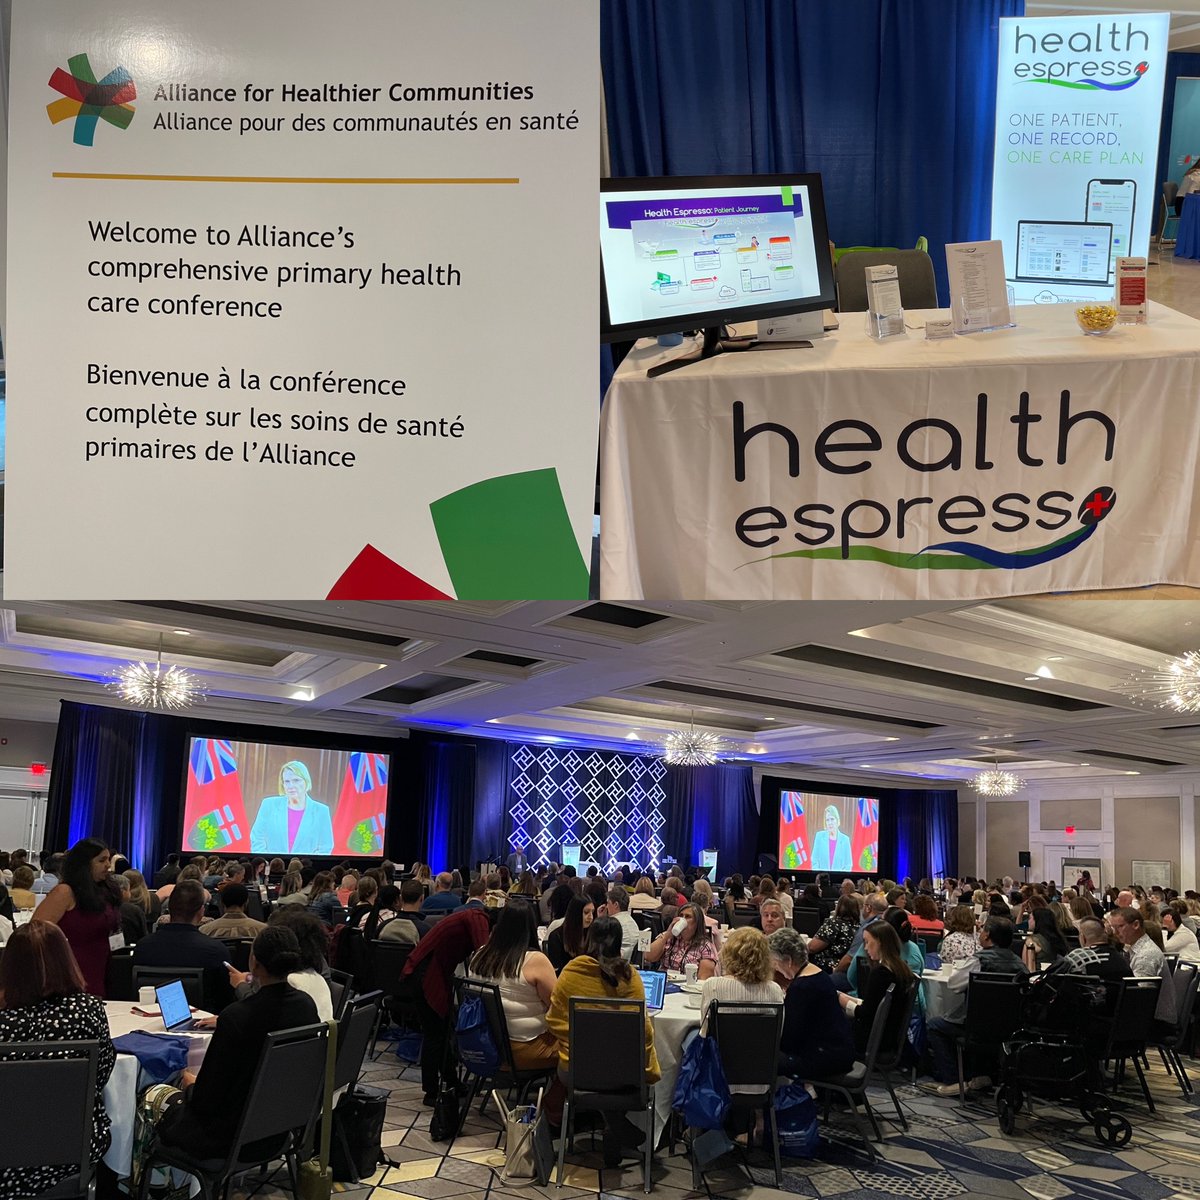 Thrilled to join the @AllianceON at the annual 2 day conference with a focus on #HealthEquity. Our team takes it up a notch to extend the line to #DigitalHealthEquity extending critical #AccessToCare to remote communities #ConnectedCare #CollaborativeCare #RemotePatientMonitoring